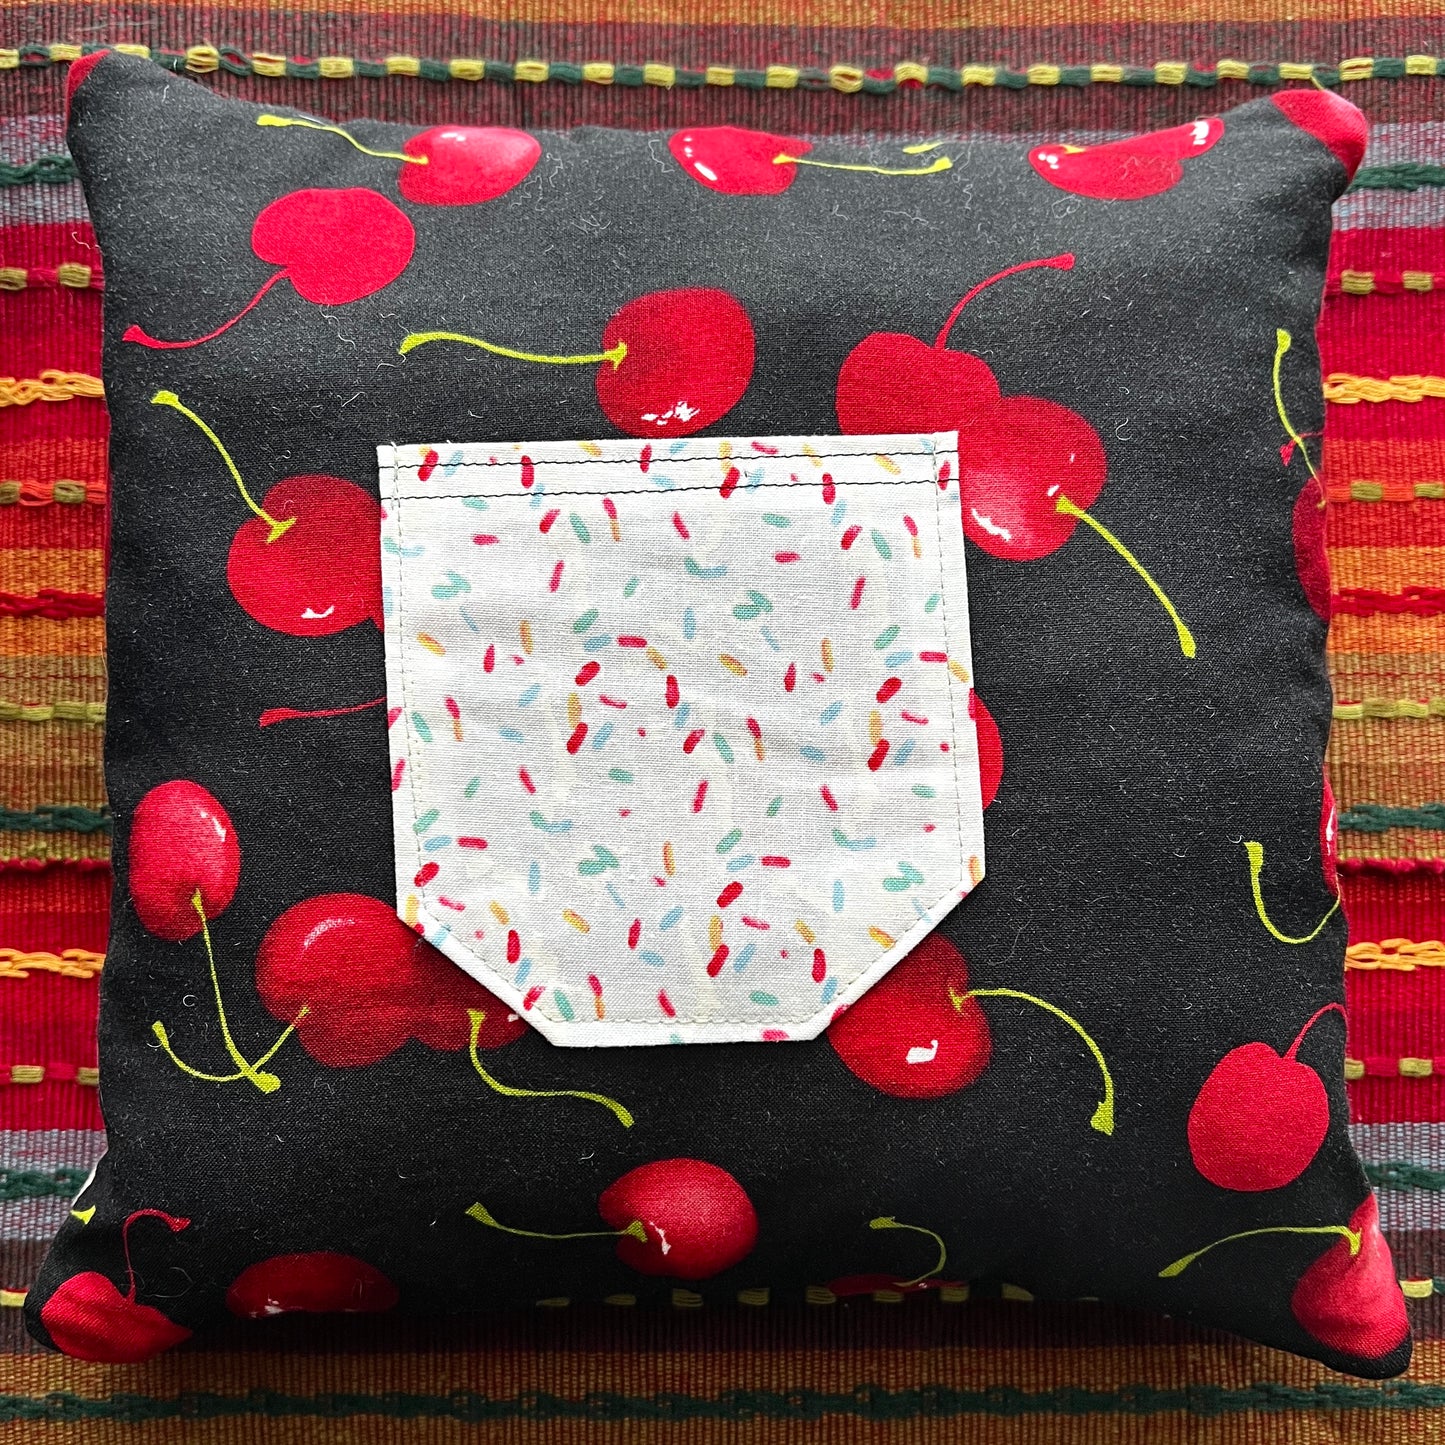 back view of lilo and stitch red cathedral square pillow, with cherries and sprinkles